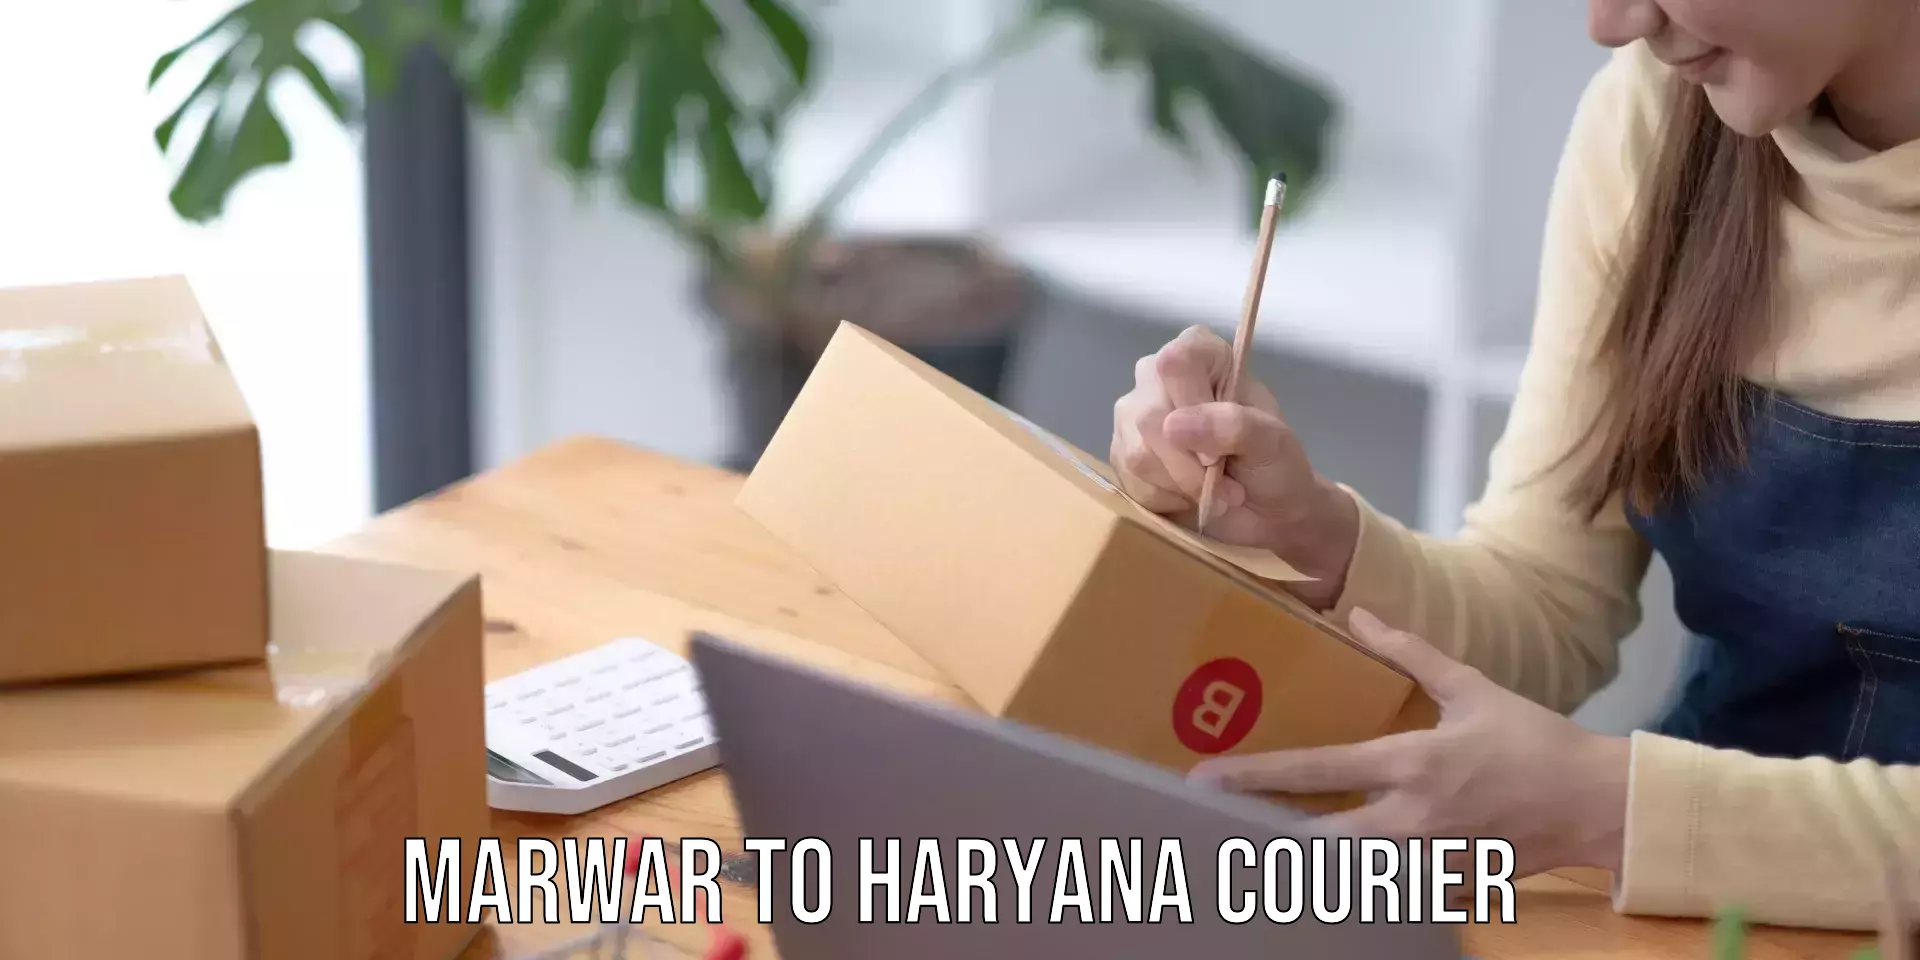 Fast delivery service Marwar to Haryana